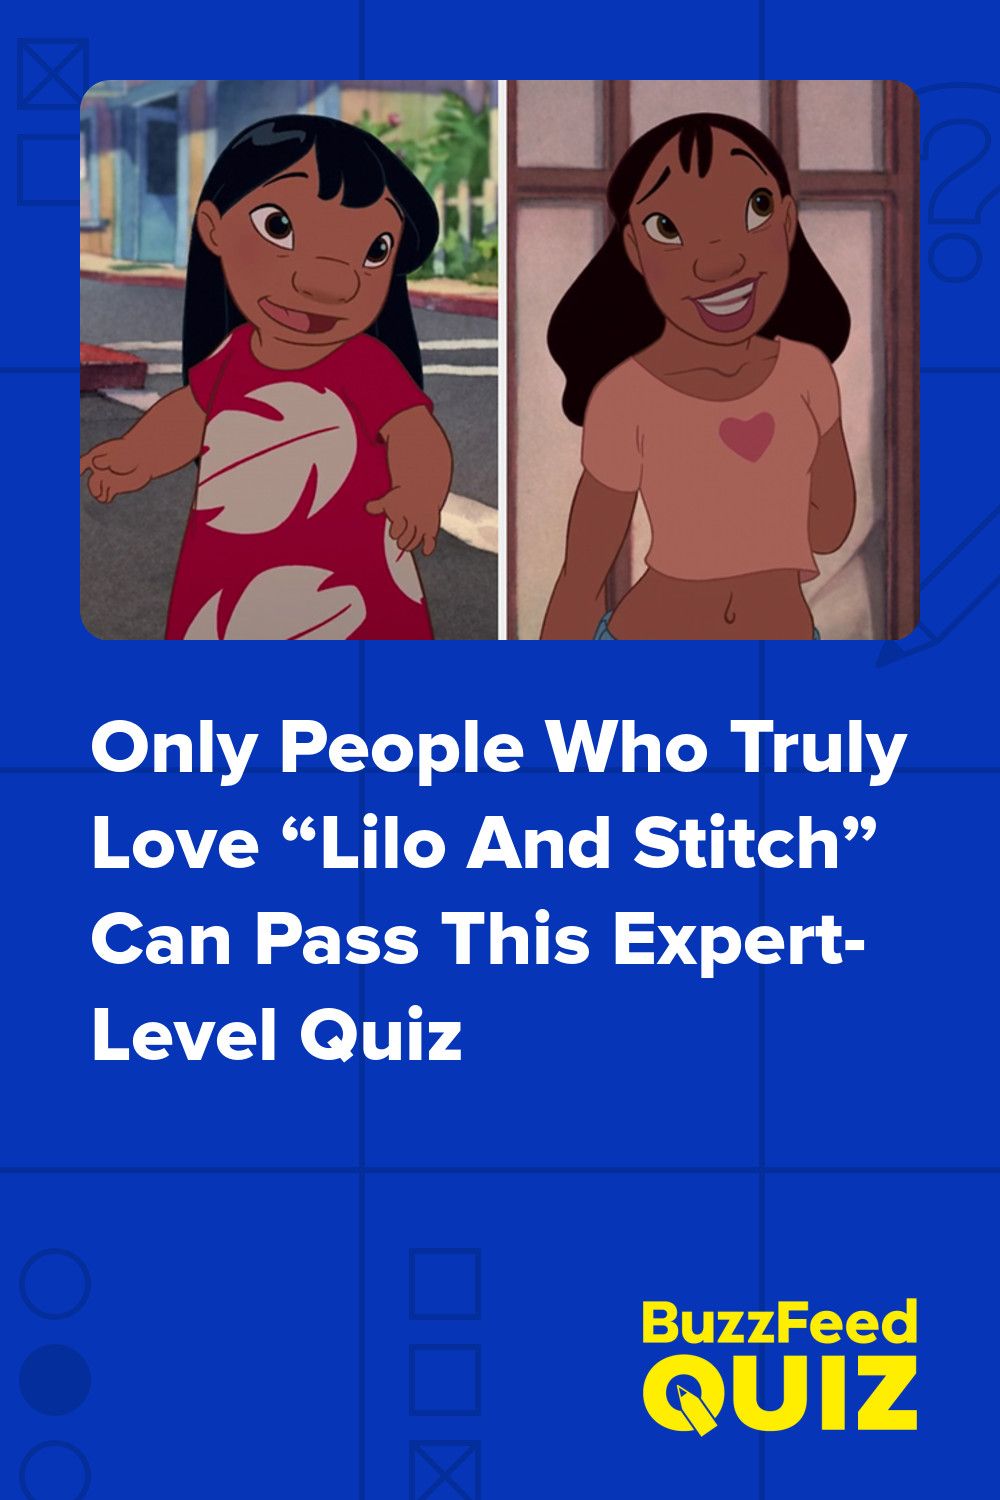 Only People Who Truly Loved “Lilo And Stitch” Can Pass This Expert-Level Quiz